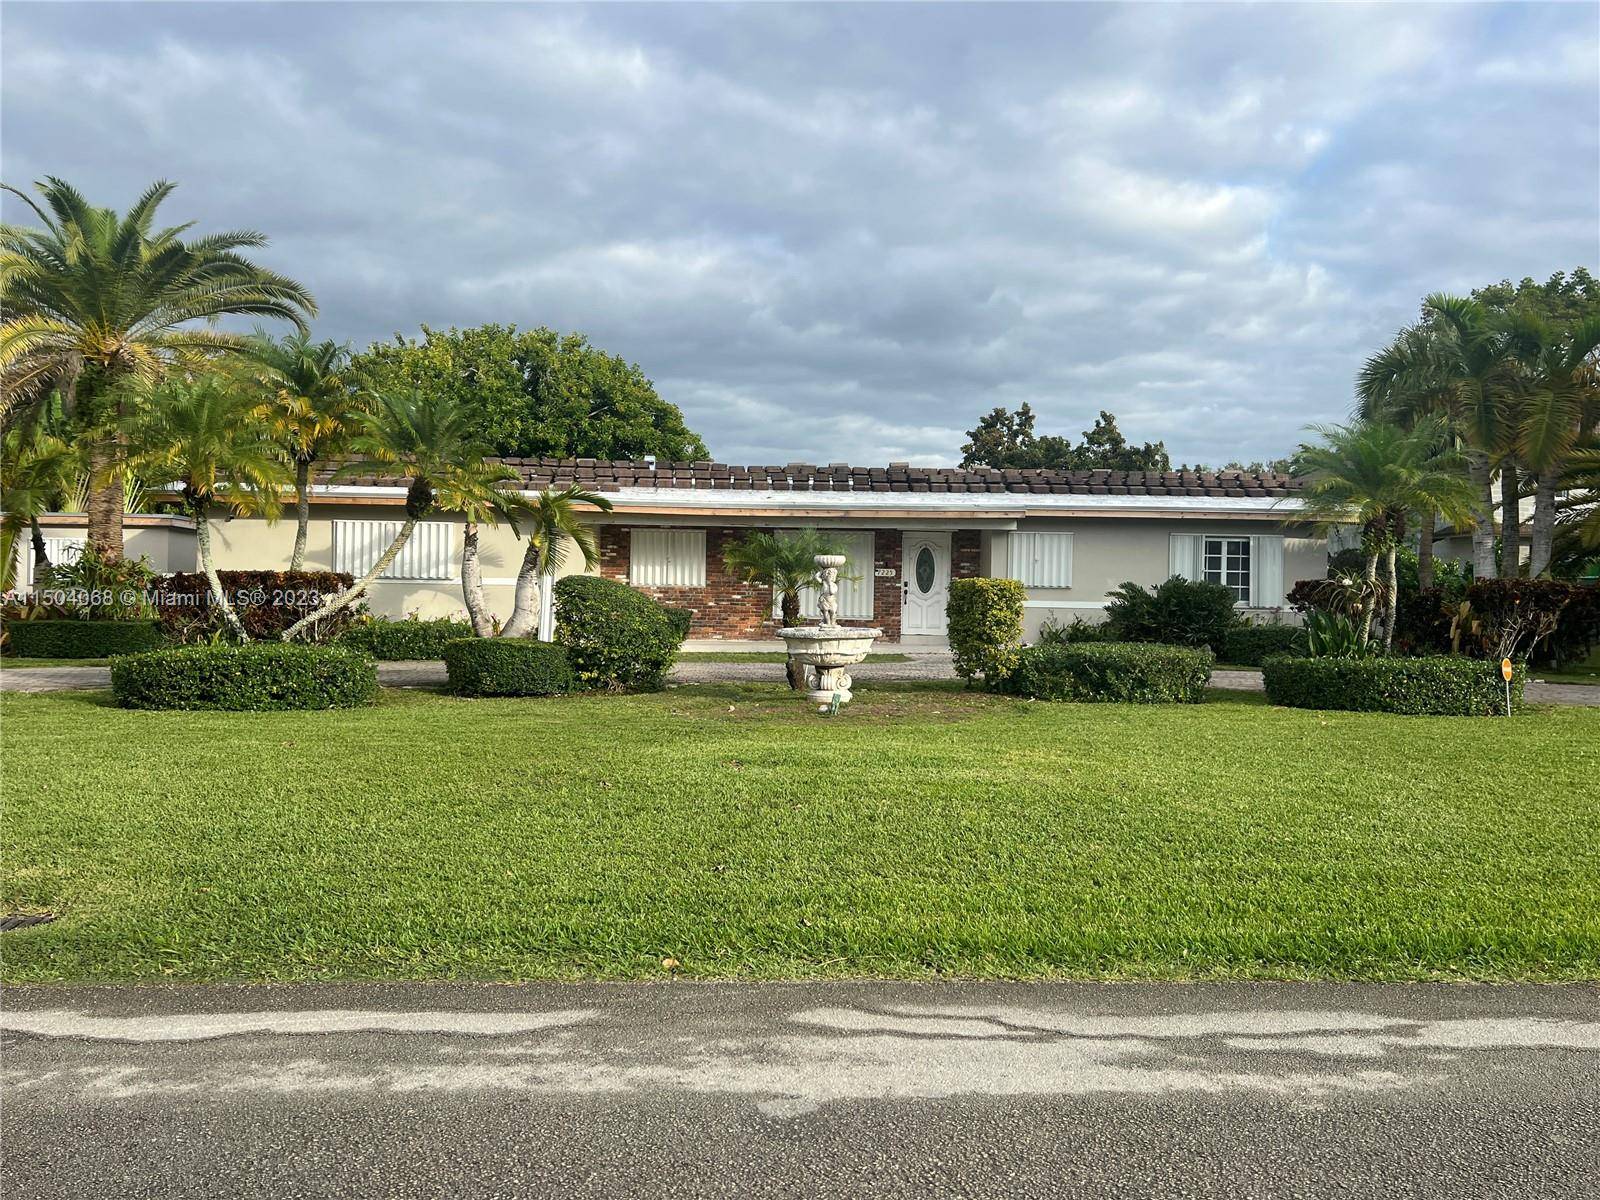 Motivated seller ! Best priced home in all South Miami on nearly a builders acre Tear down or complete renovation that's expected completion date June 2024.